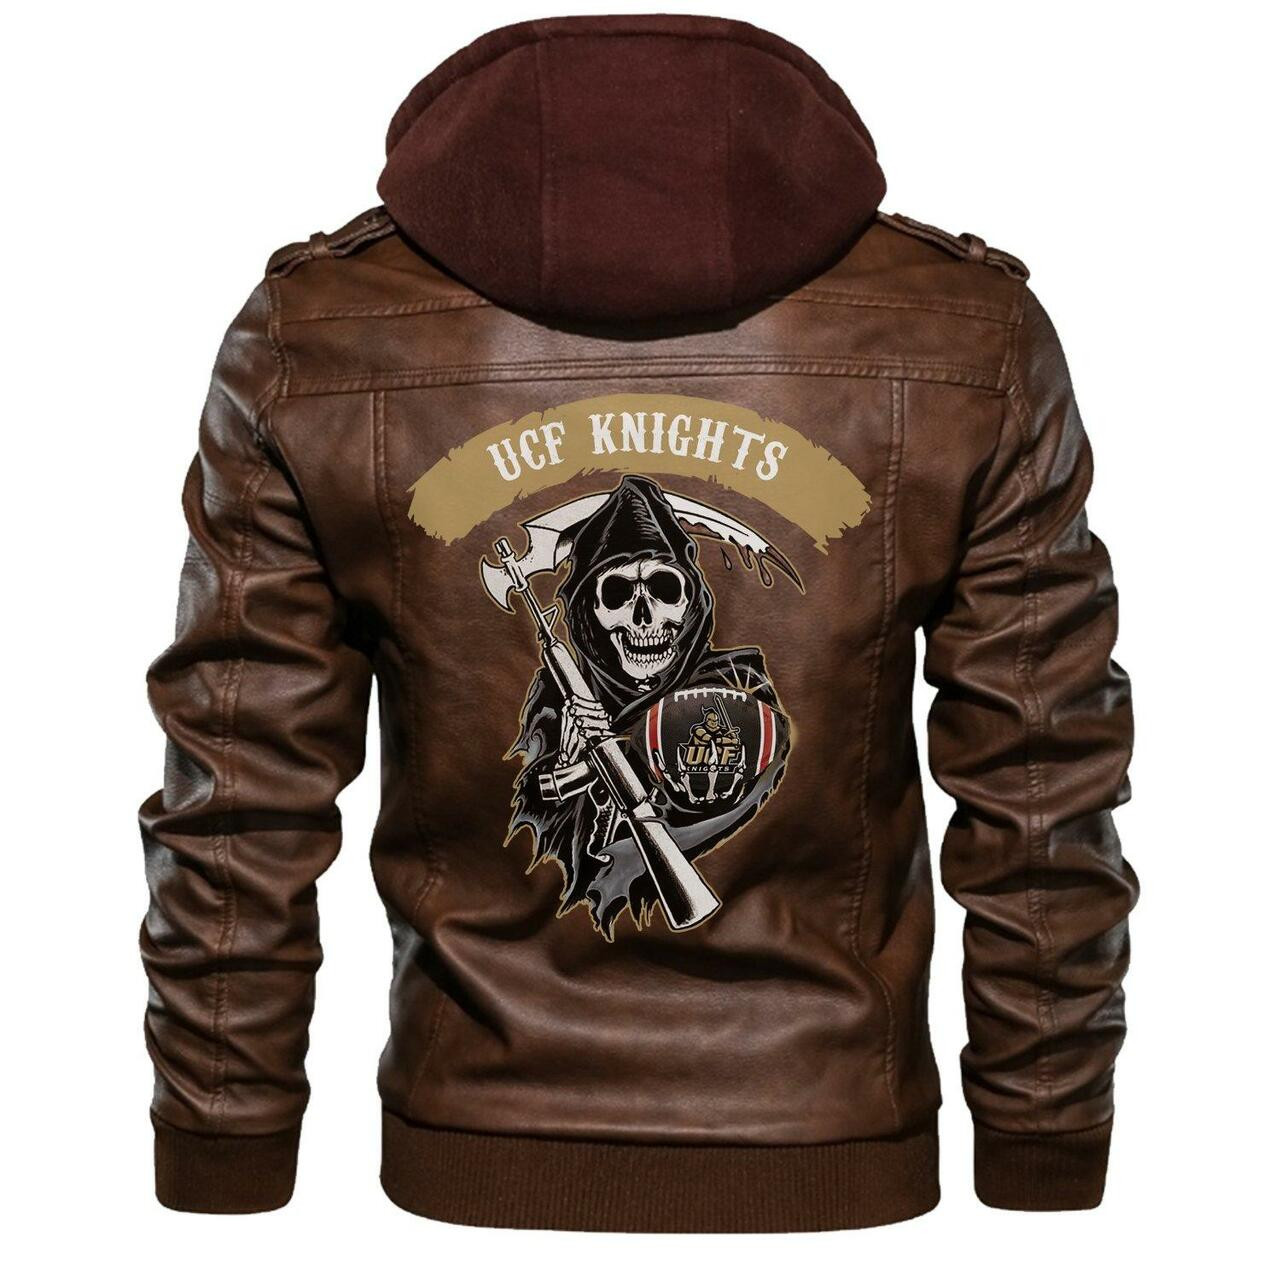 You'll get the best Leather Jacket by shopping online 76